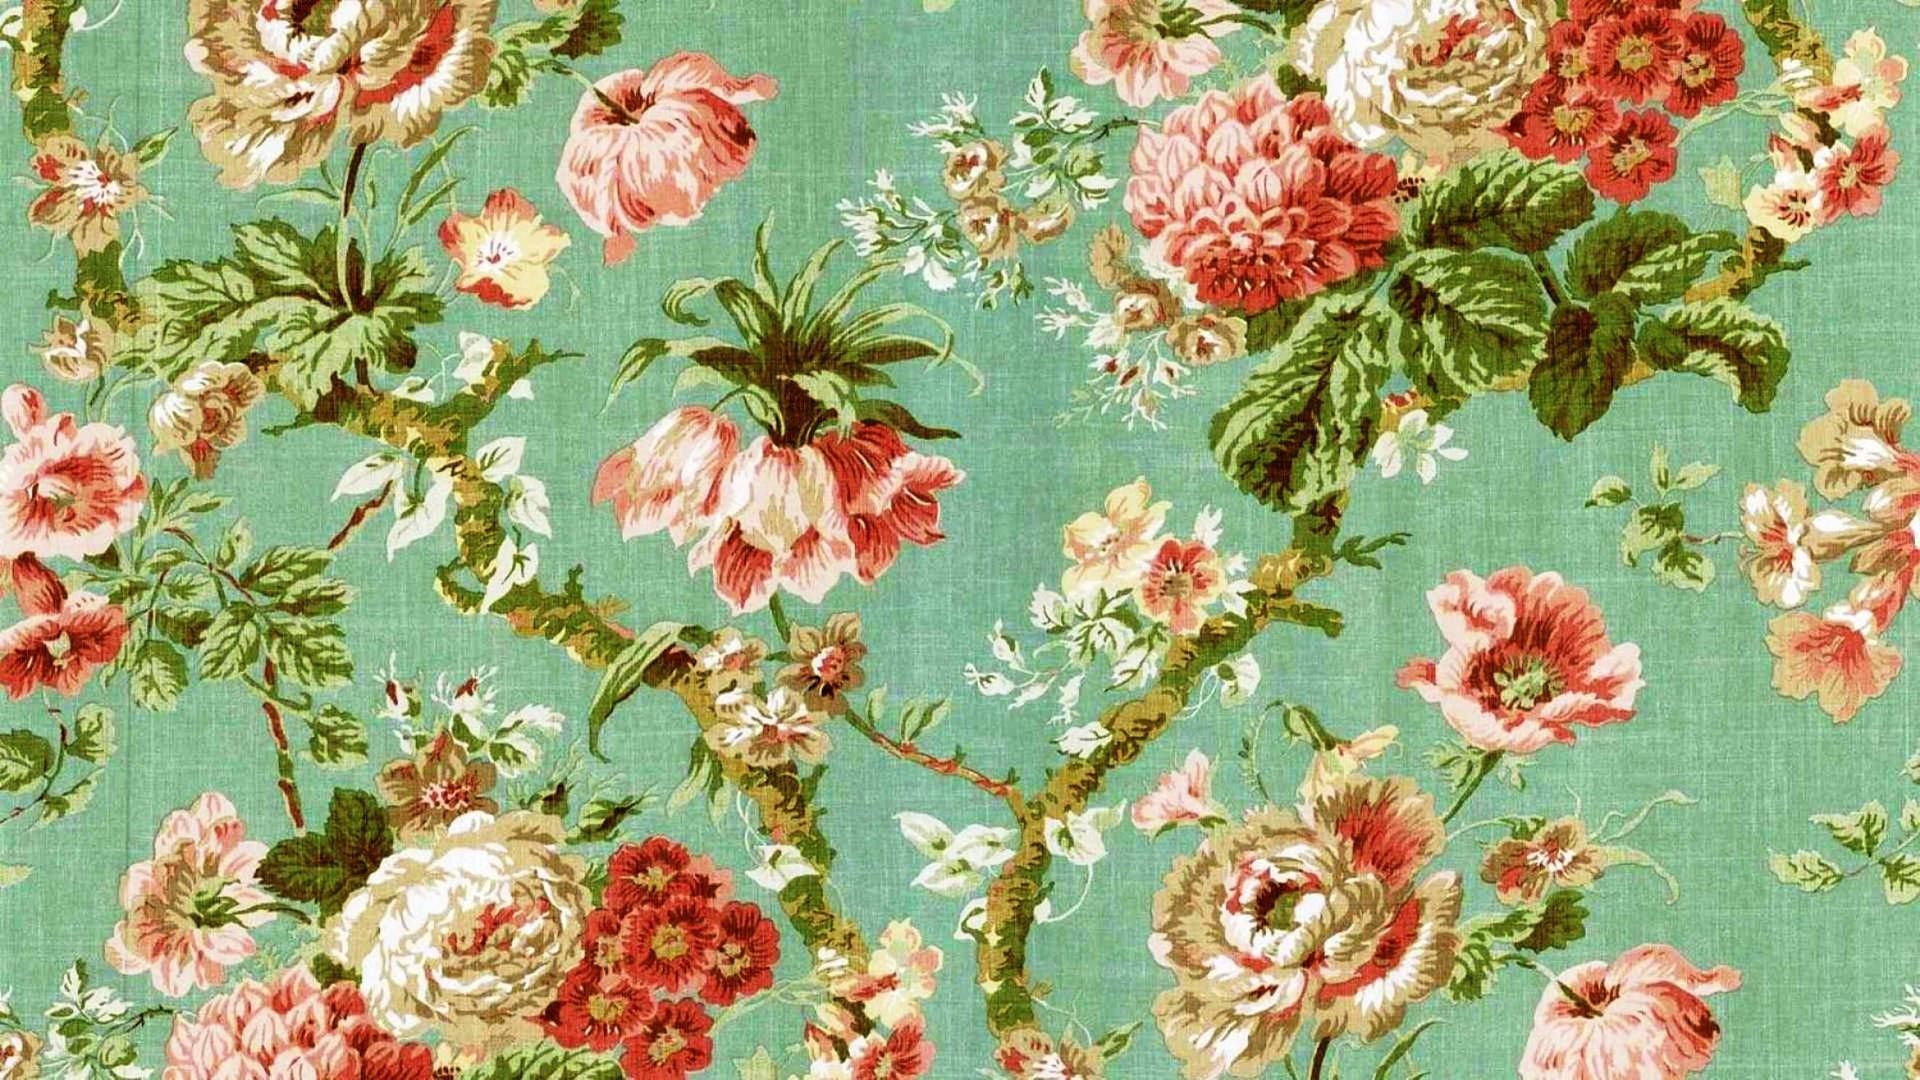 Green And Pink Floral Vintage Aesthetic Laptop Background